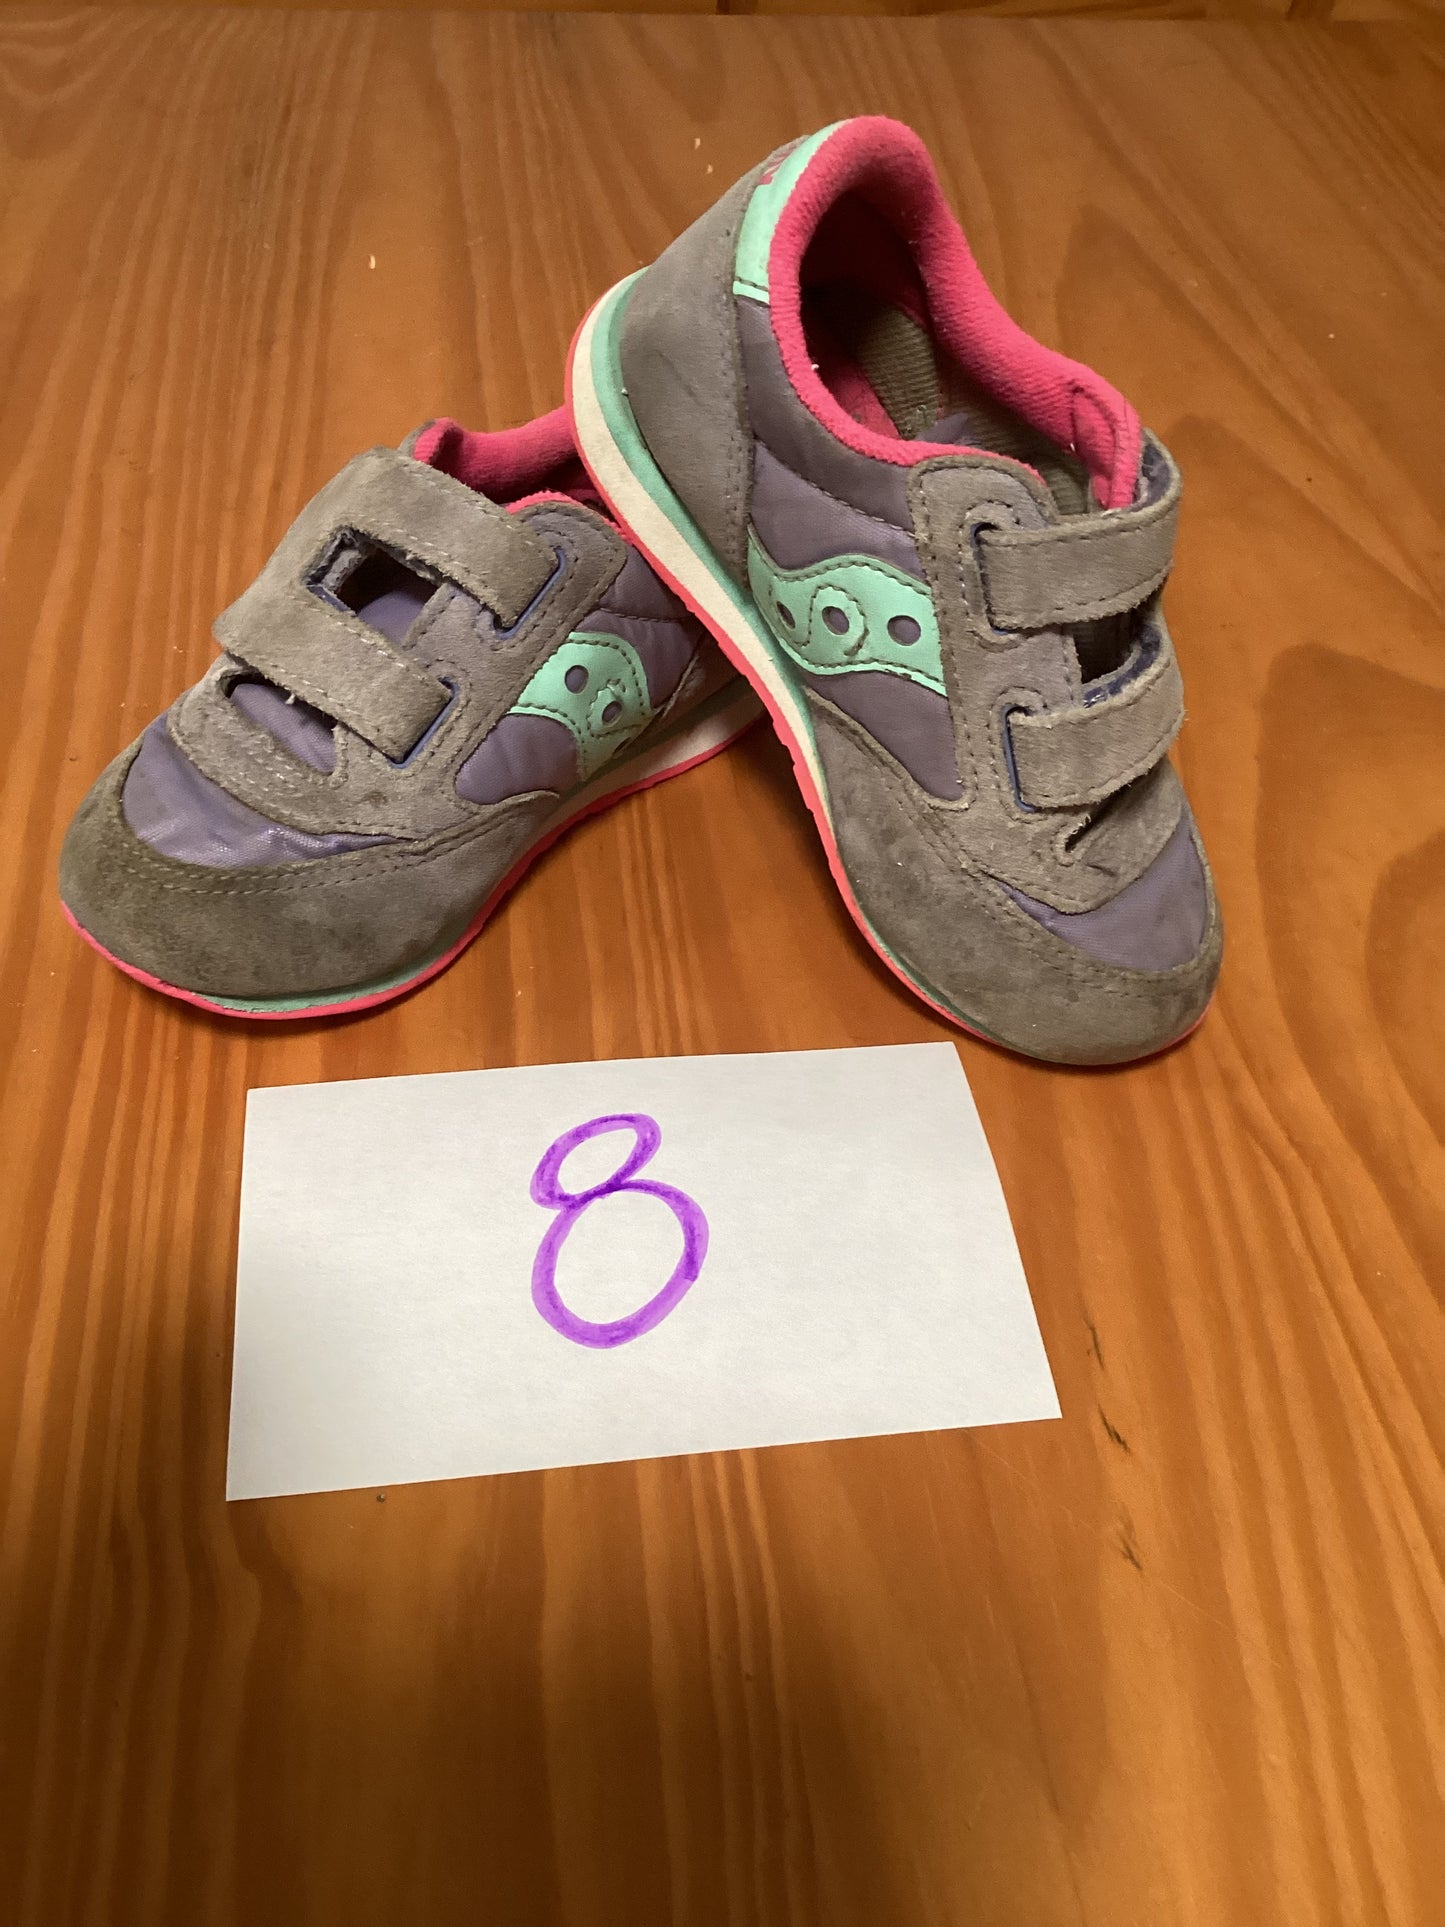 Saucony Toddler size 8